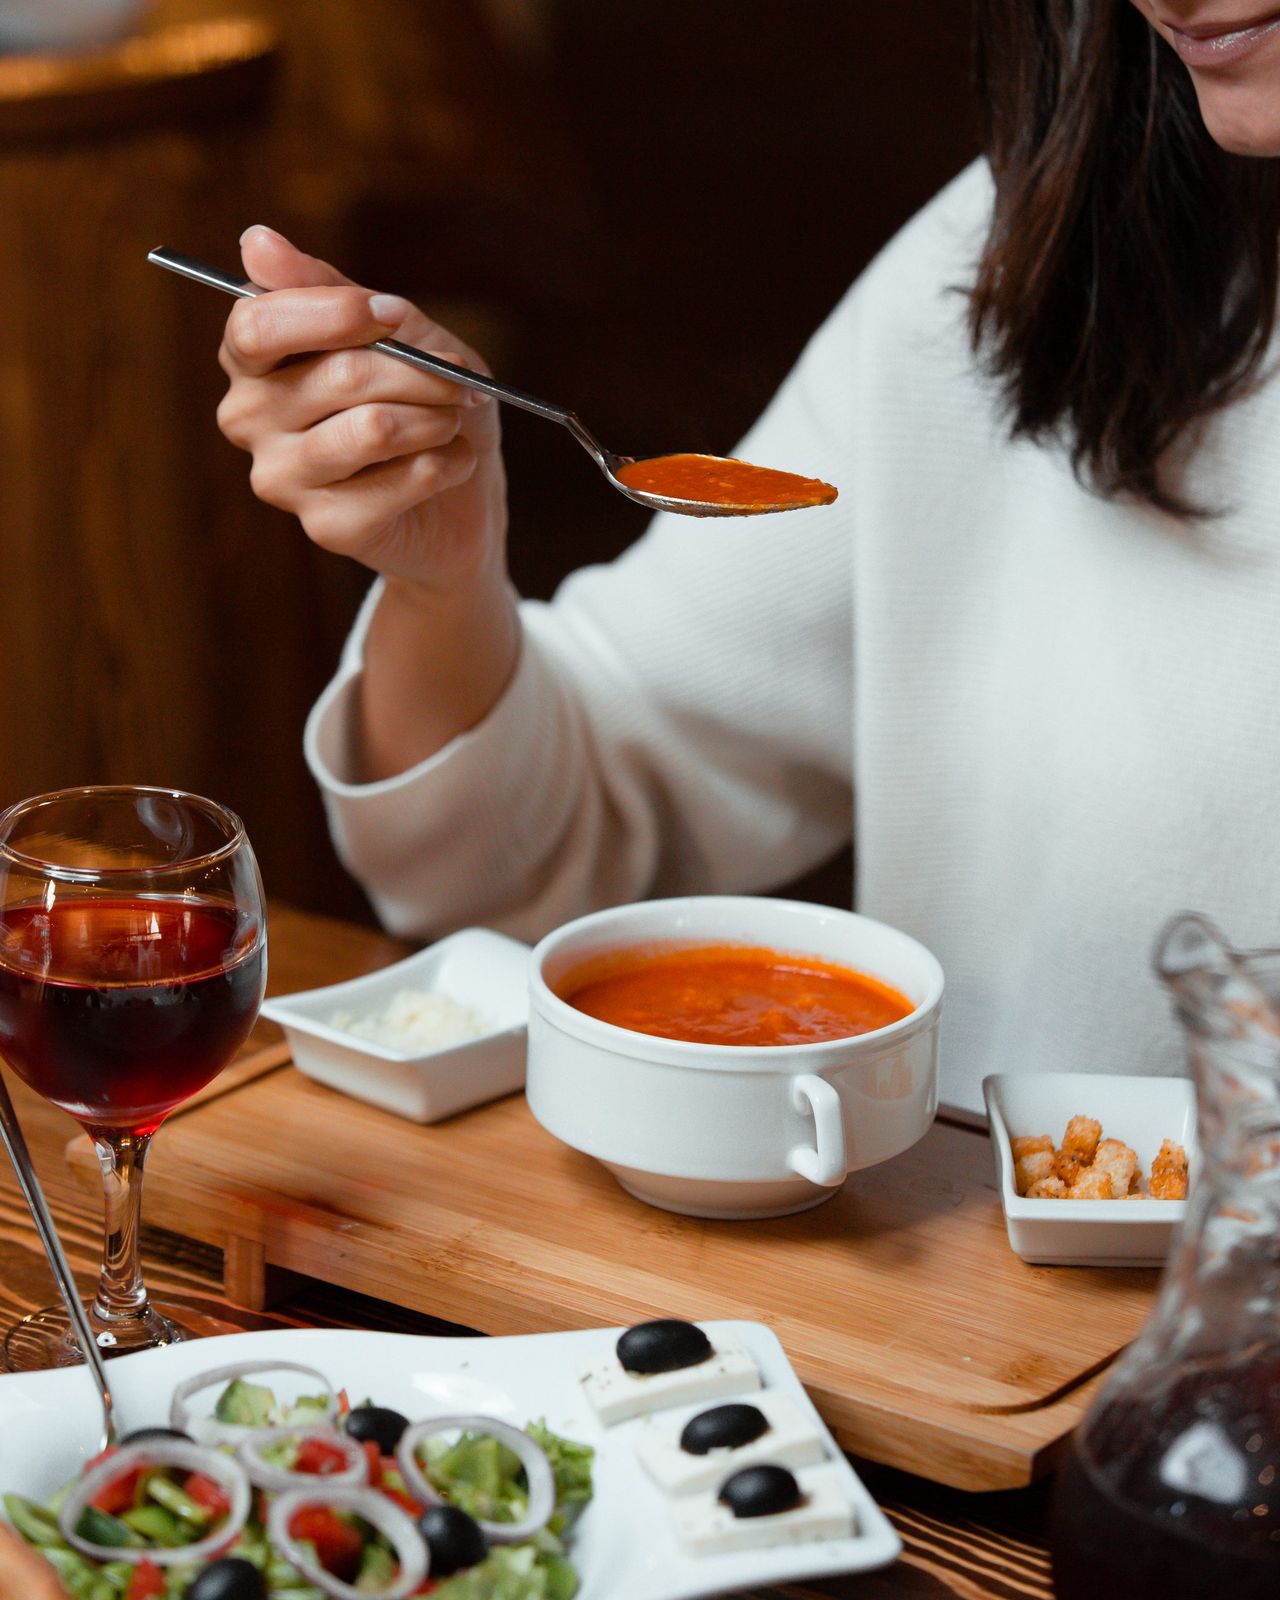 woman eating tomato soup with bread stuffing, a glass of wine